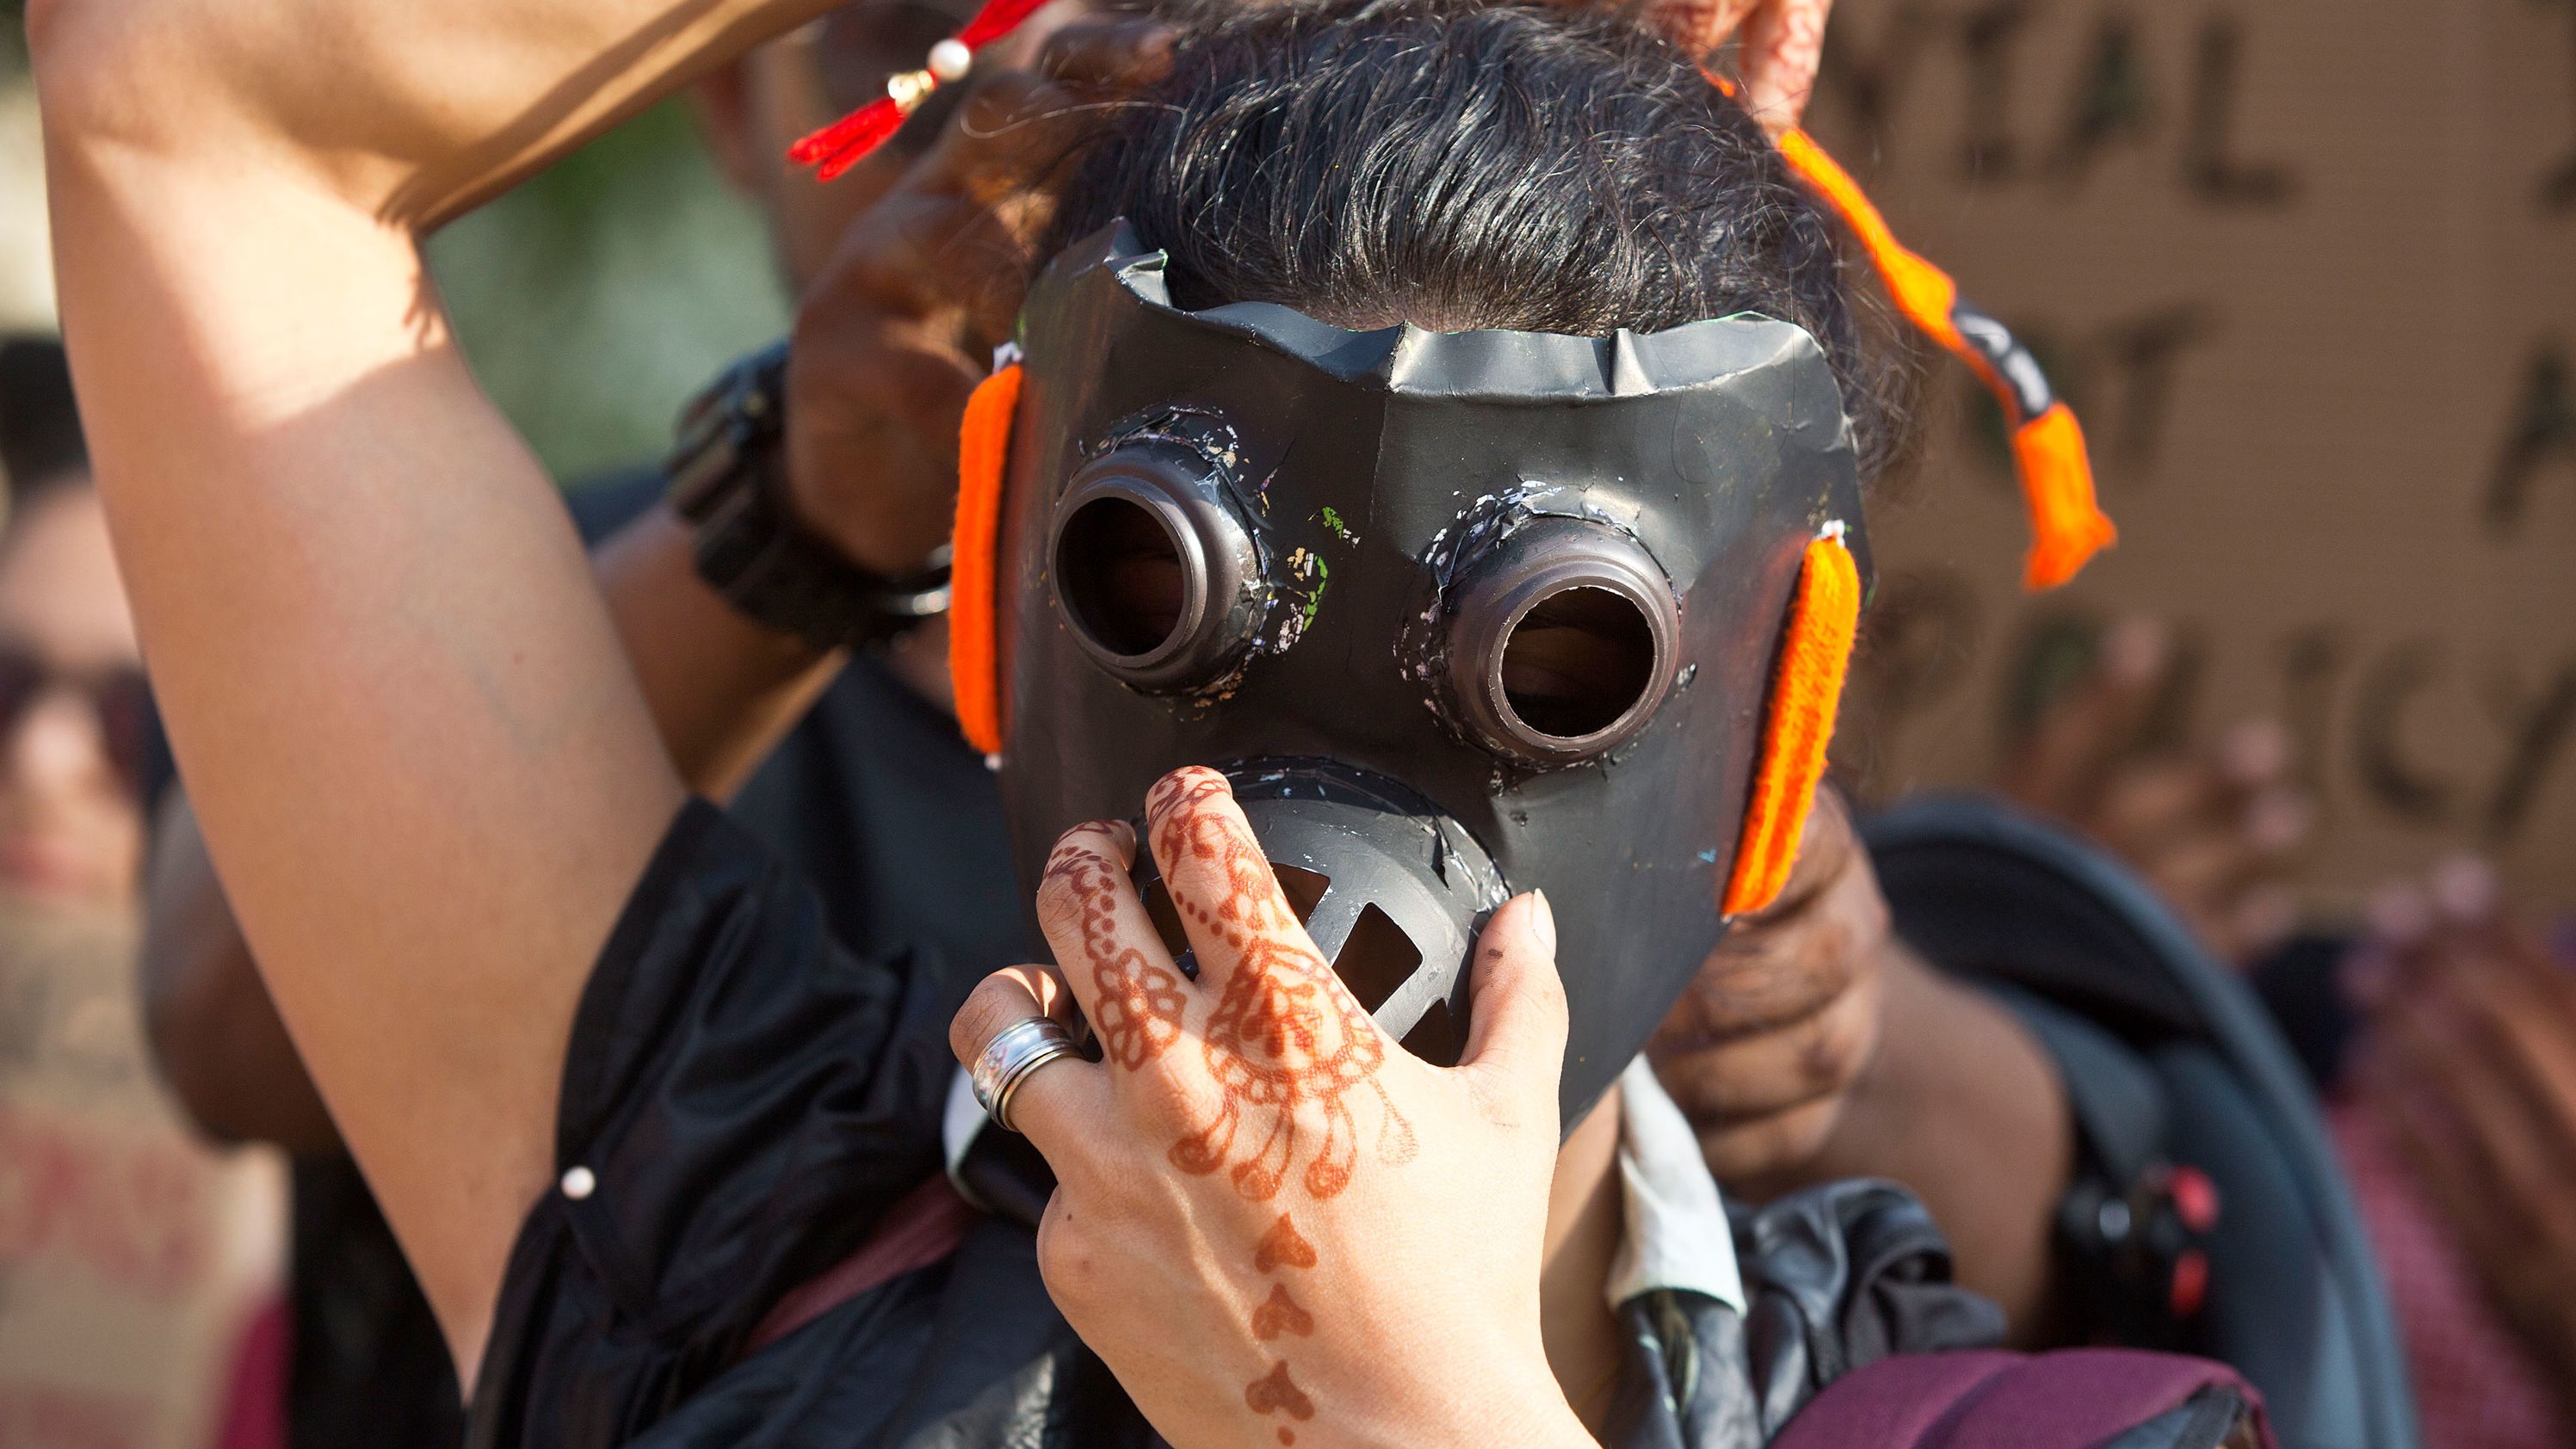 A protester wears a gas mask during a march in Gauhati, India.